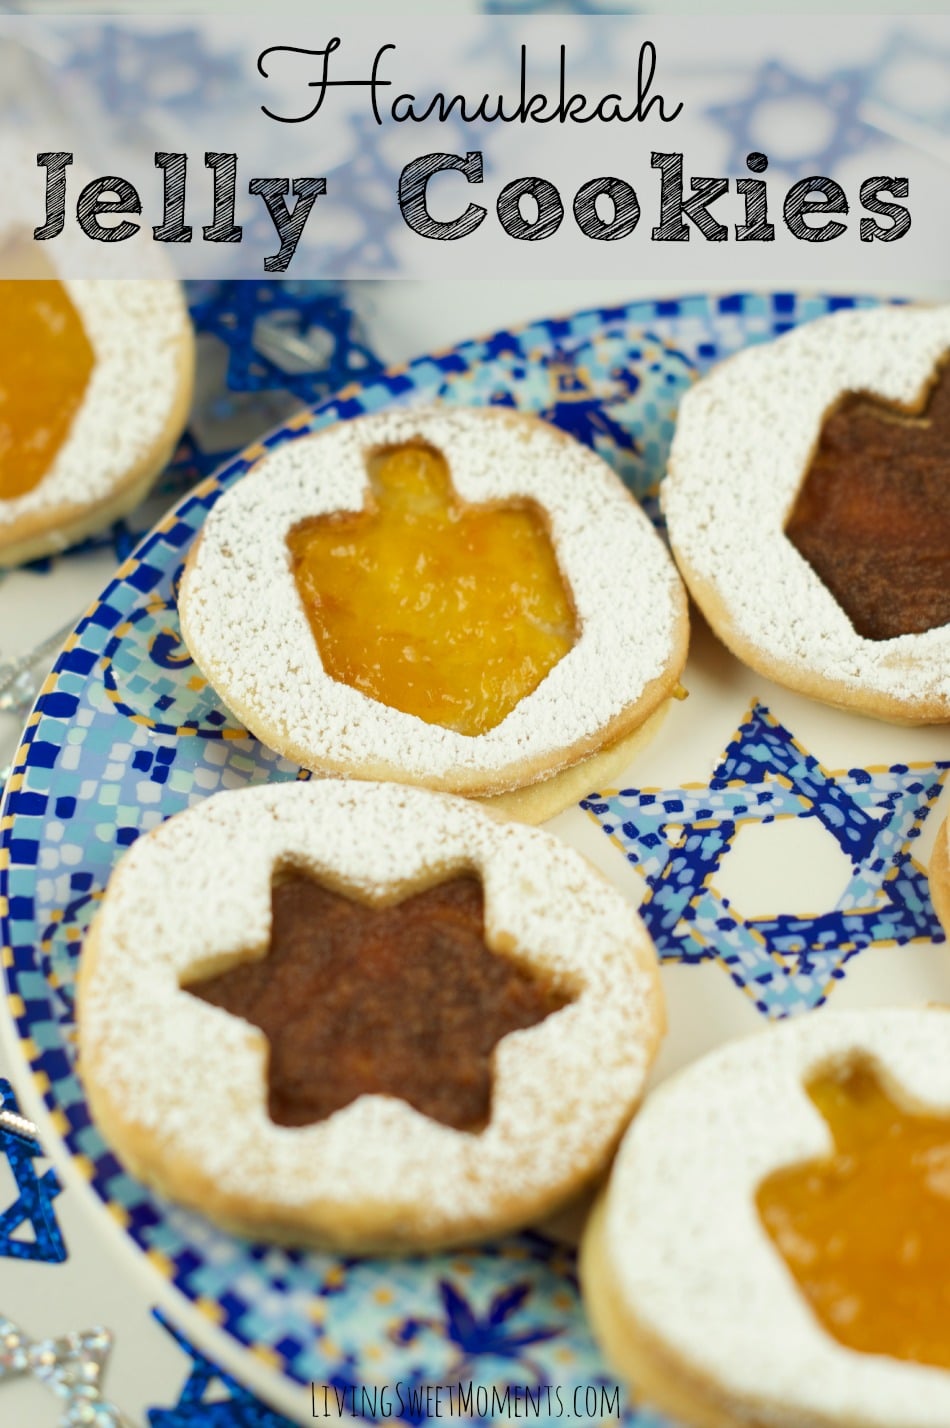 This Hanukkah Jelly Cookie Recipe is so east to make! From start to finish it only takes about 30 minutes. You can fill these up with any filling you'd like